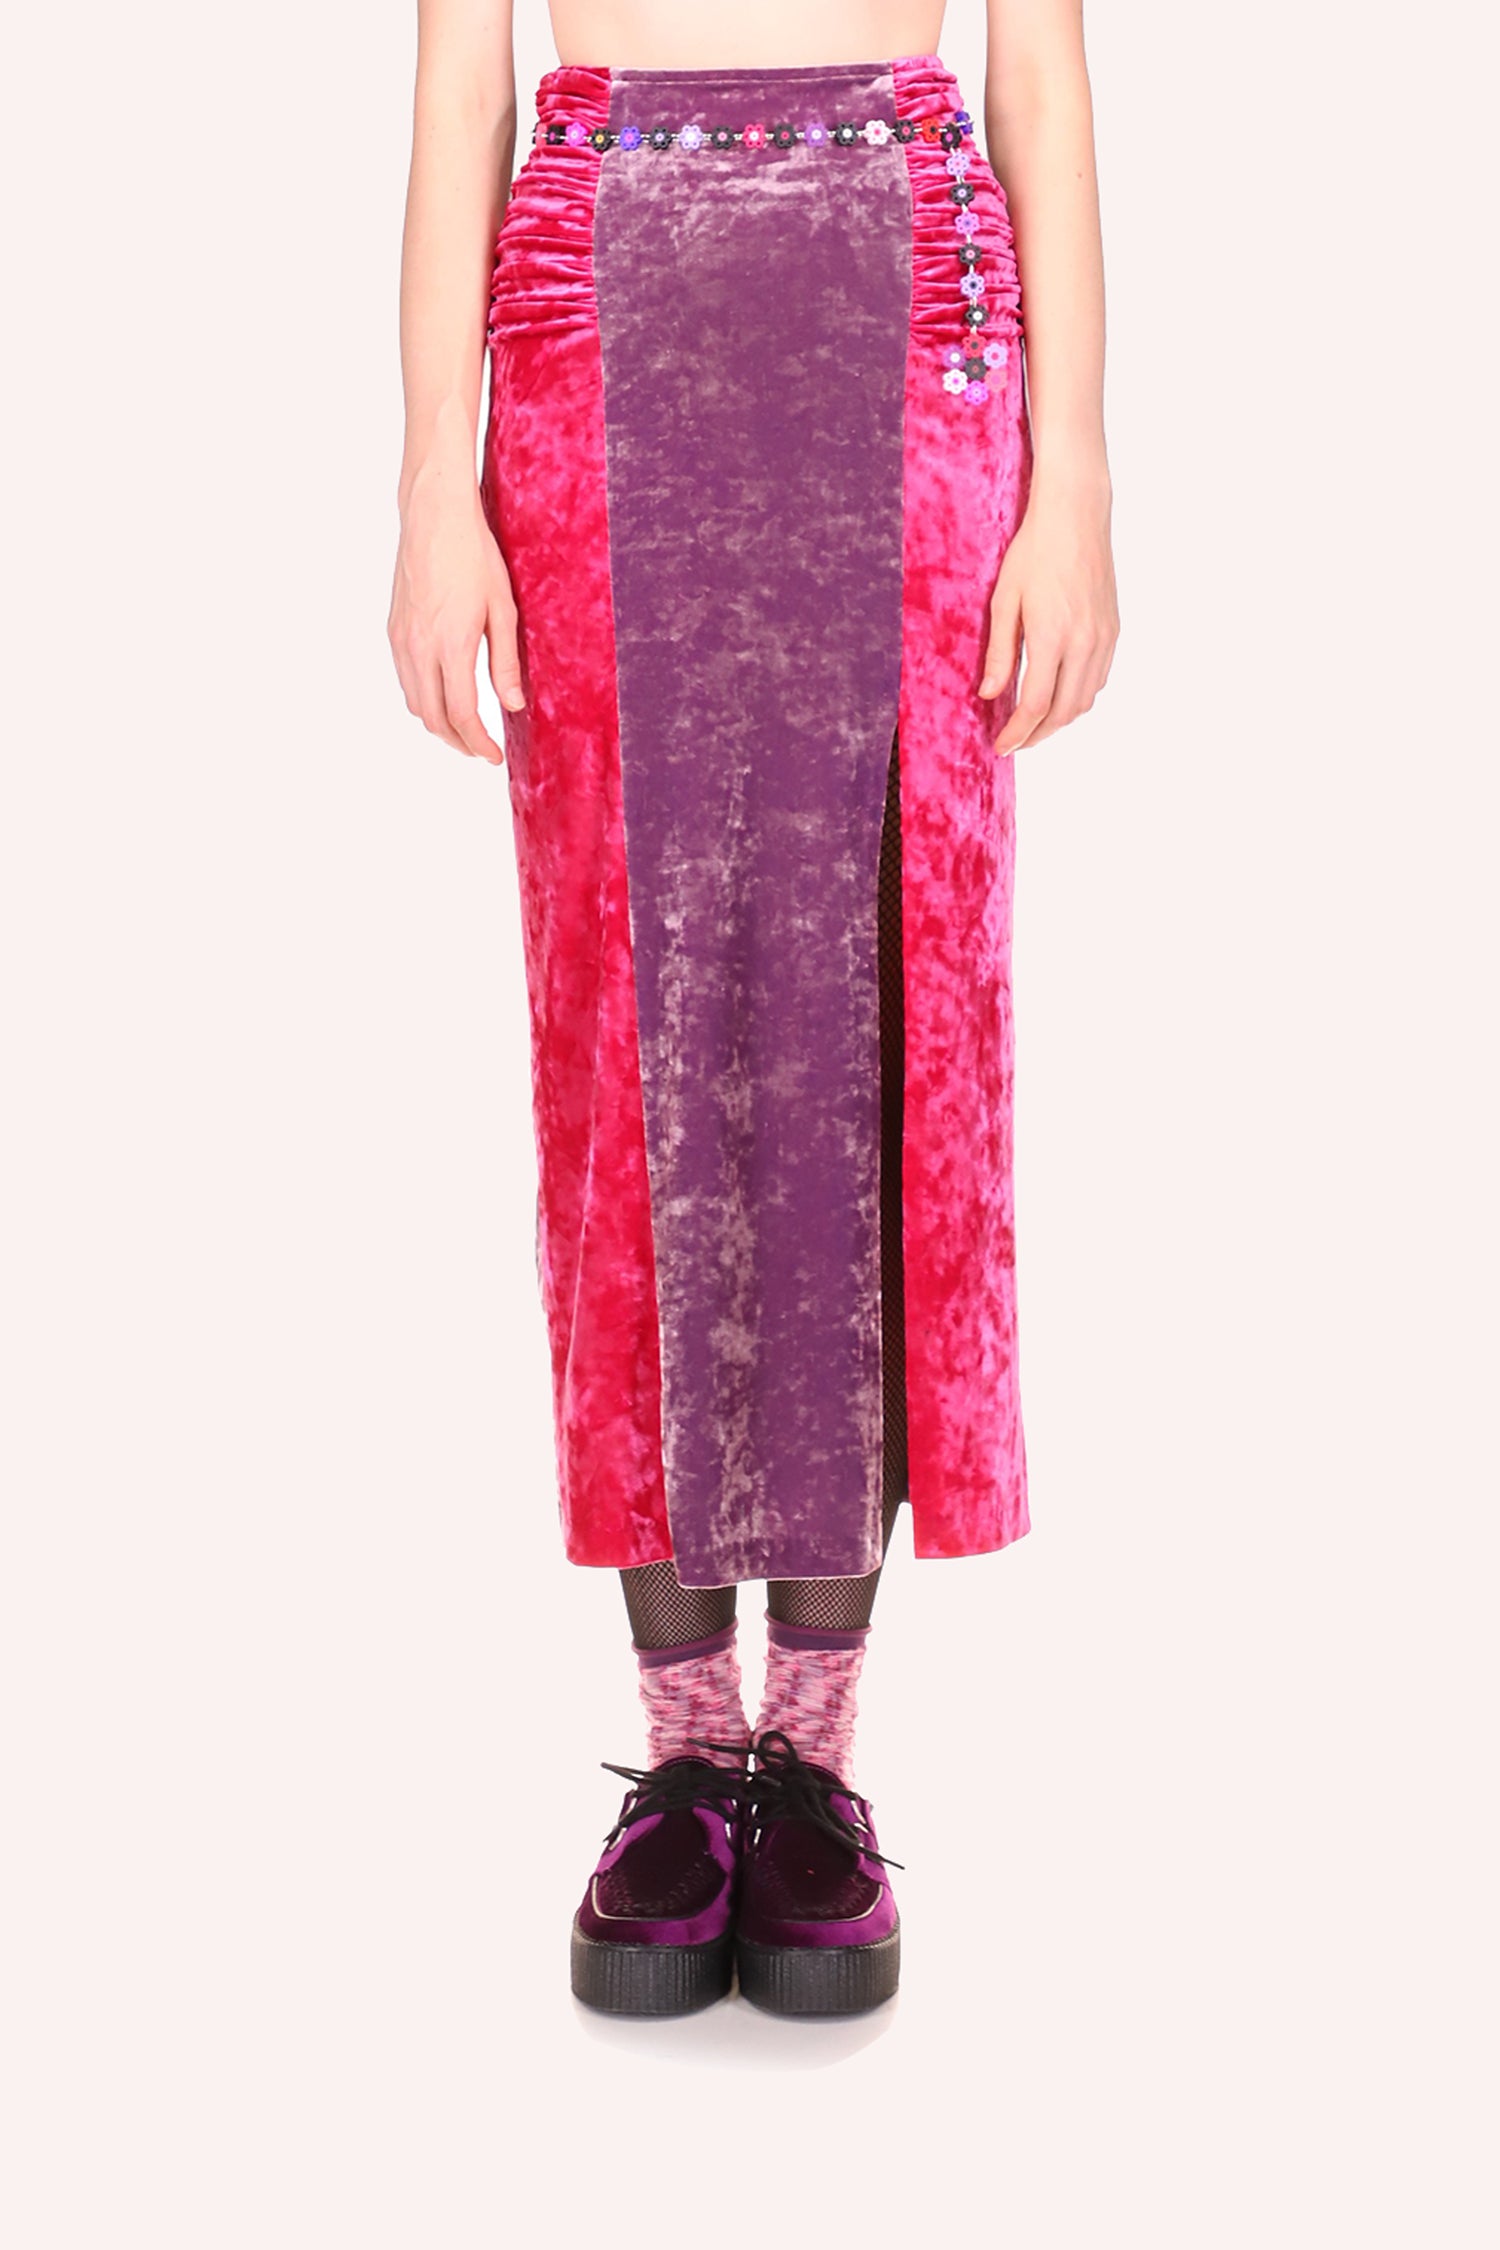 Color Block Stretch Velvet Ruched Skirt Lavender, above ankles long skirt, with band of color, lavender and pink